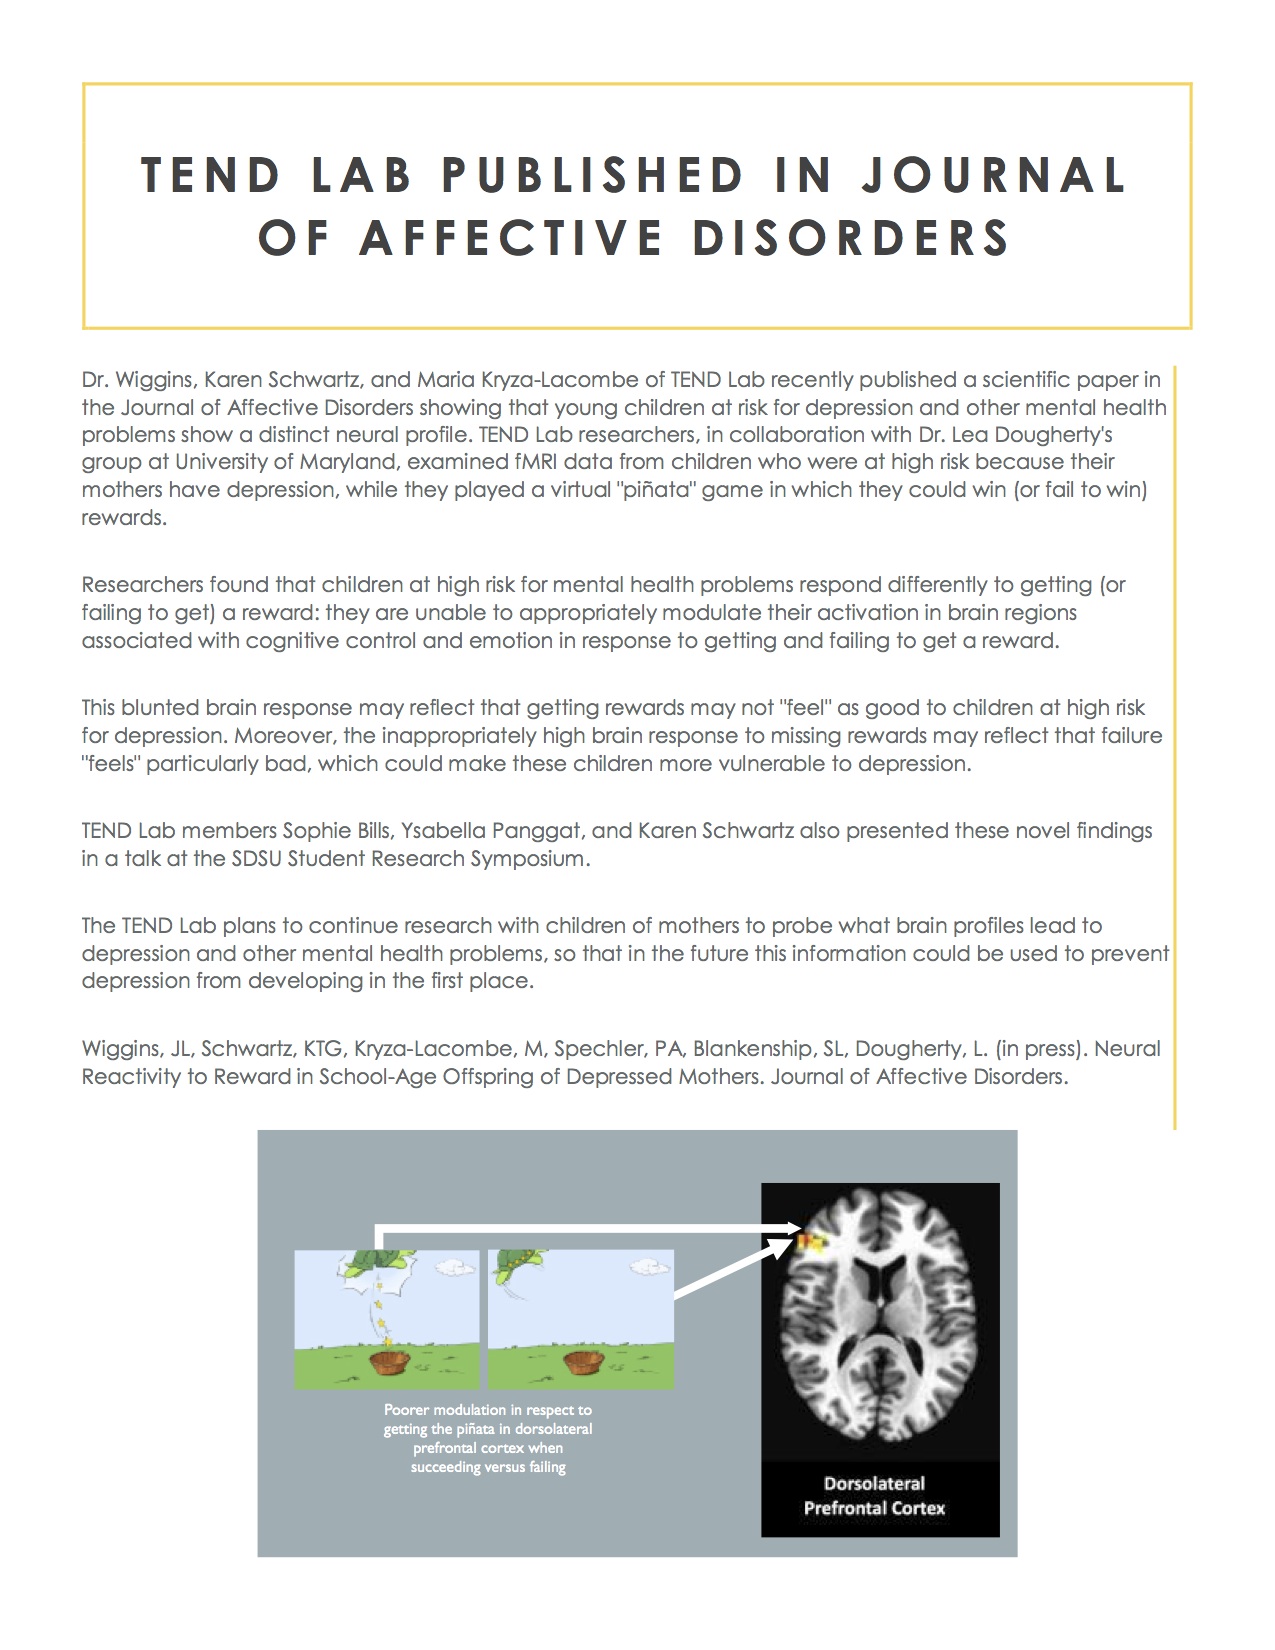 Journal of Affective Disorders article page 1 titled "TEND Lab Published in Journal of Affective Disorders"